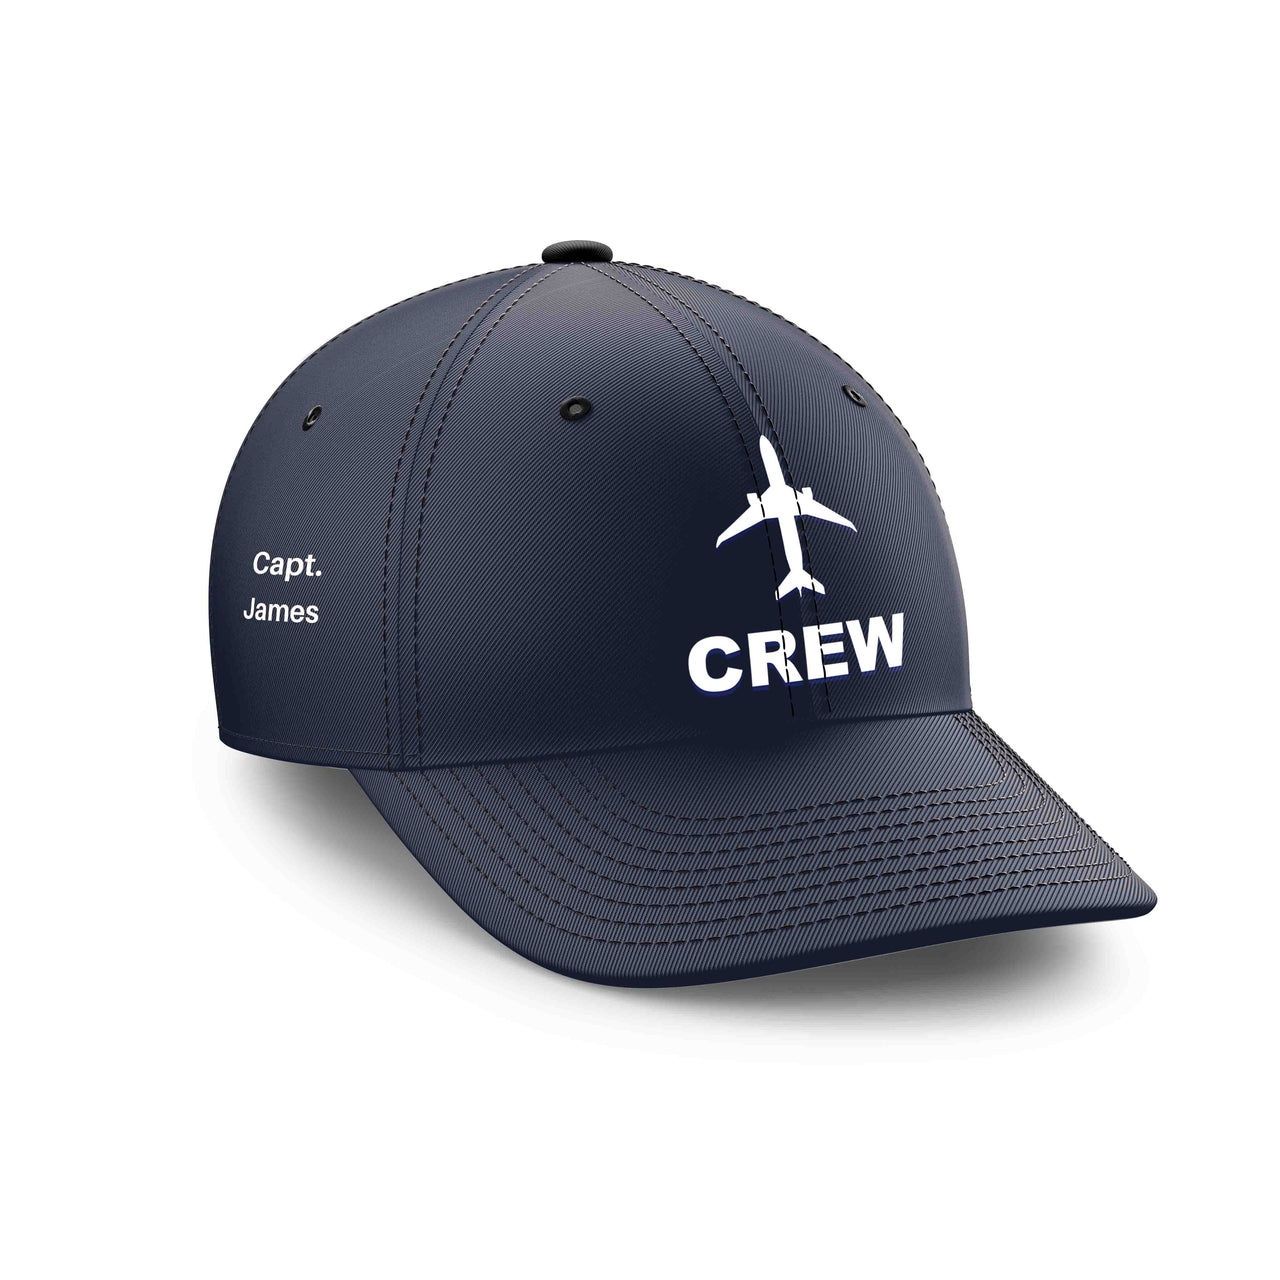 Customizable Name & CREW Embroidered Hats